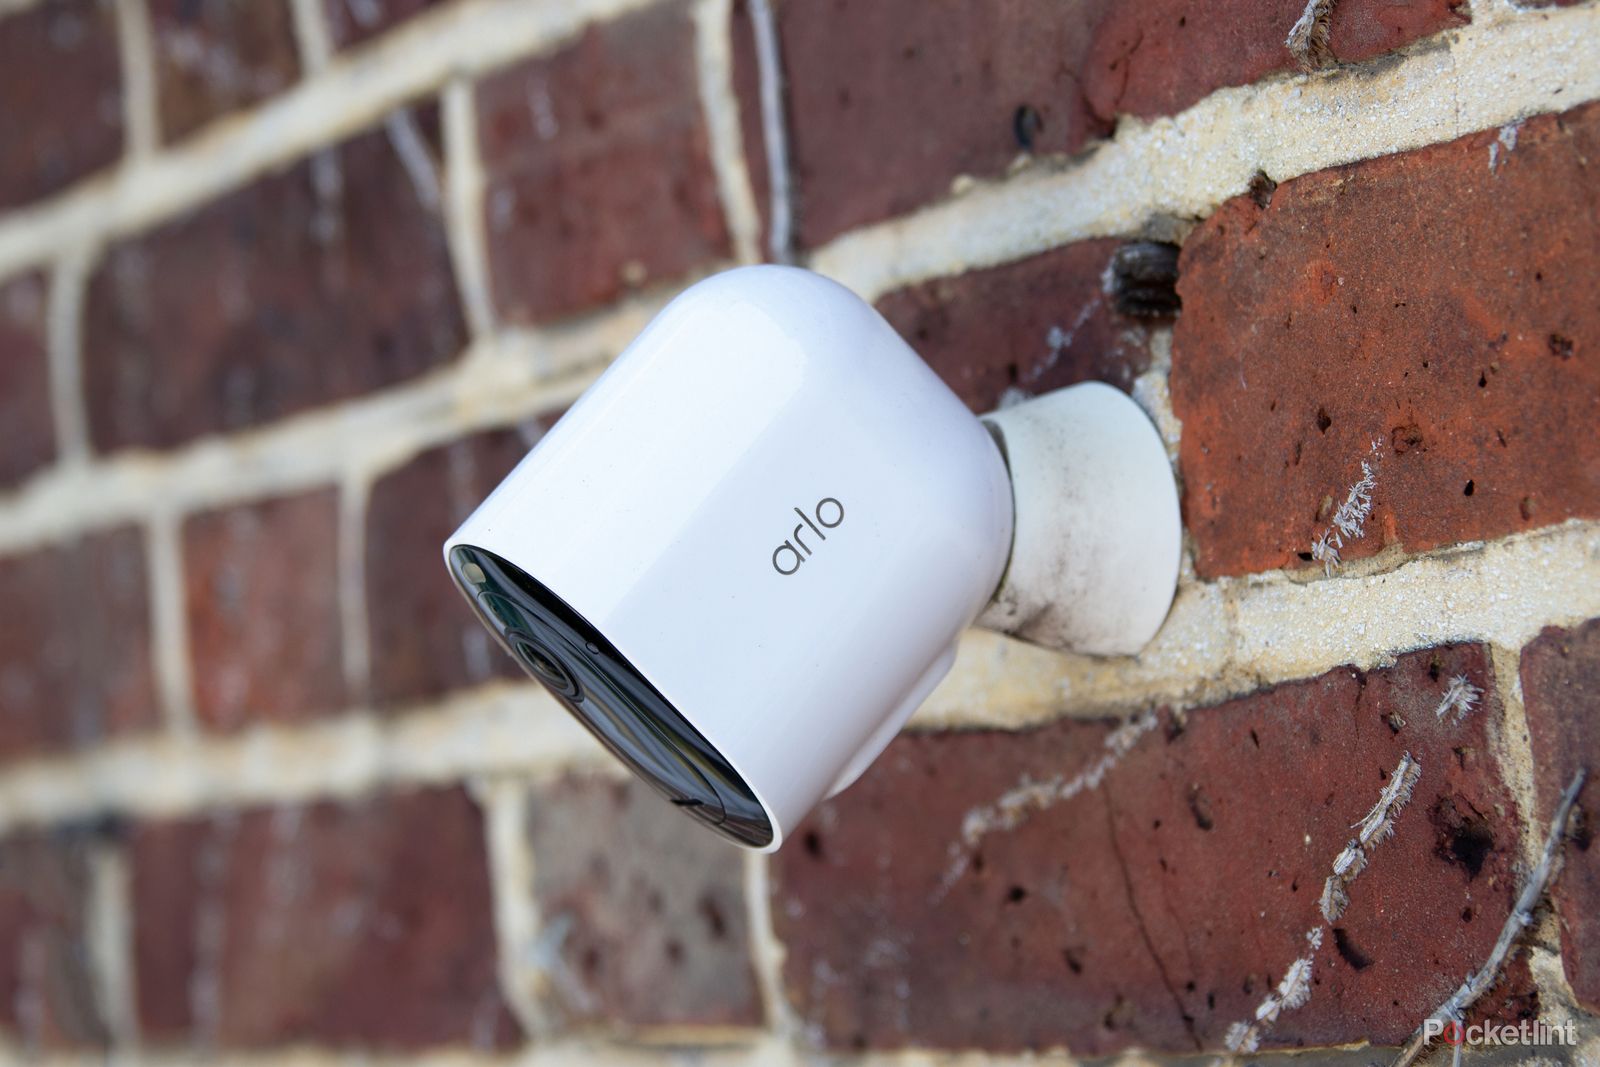 I was blown away by how good this home security camera is and right now it's $180 off